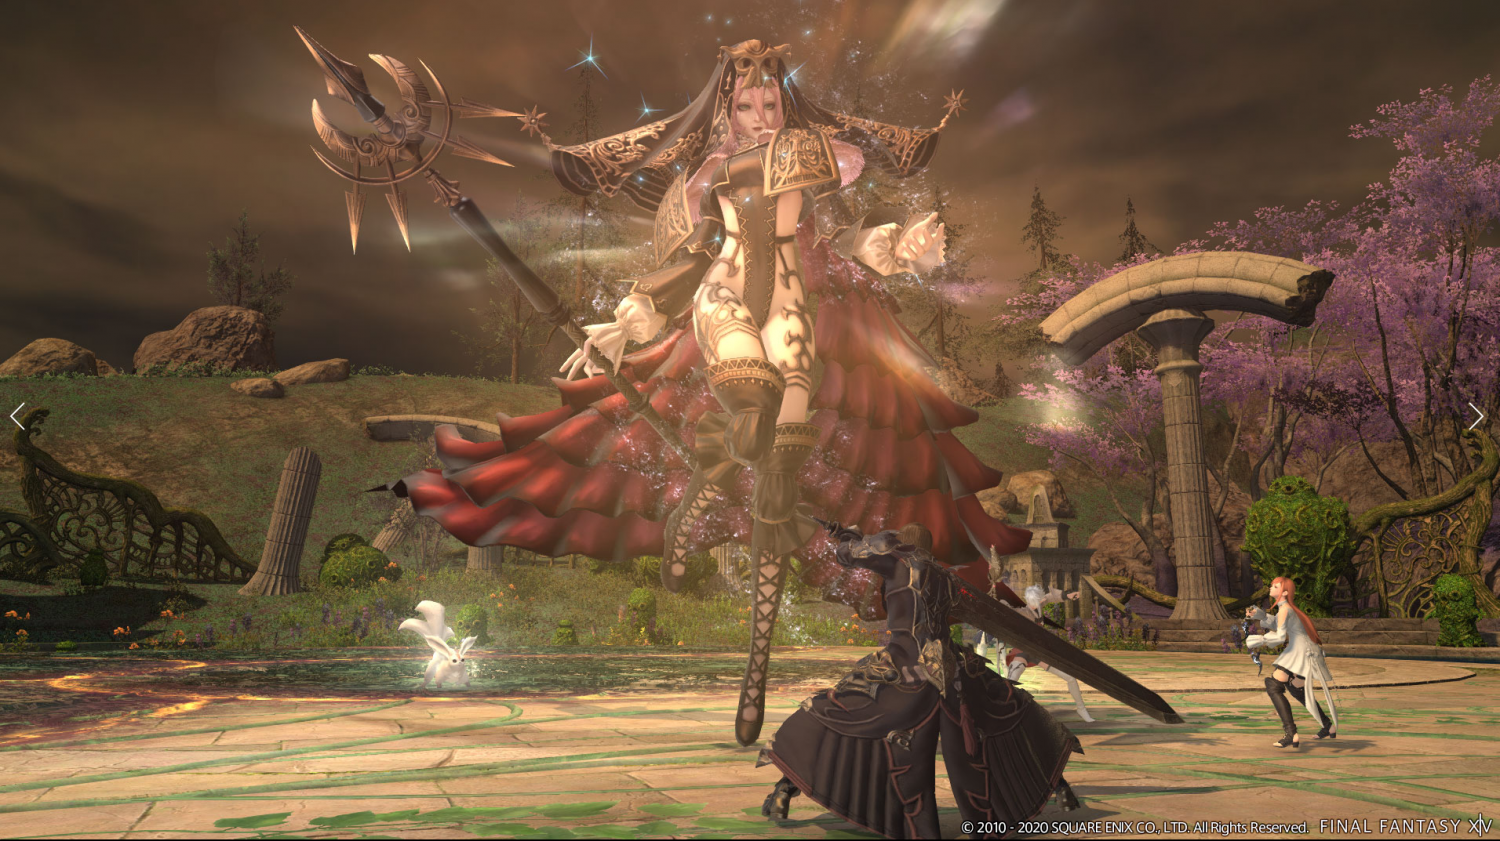 FF14's new Patch 5.3 Reflections in Crystal update launches tomorrow